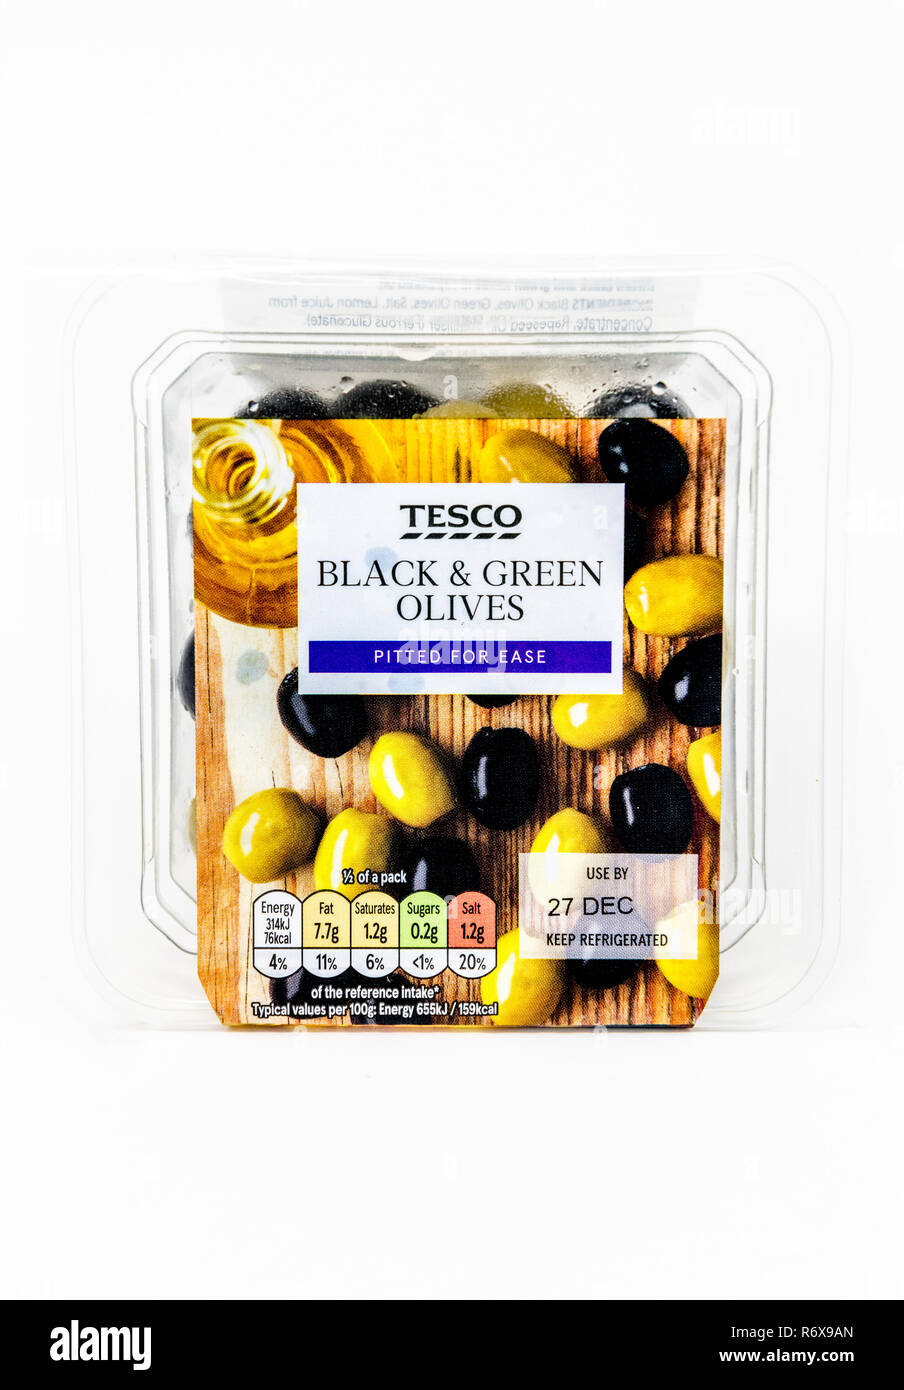 Tesco Black and Green olives in a clear single use plastic tub. Stock Photo